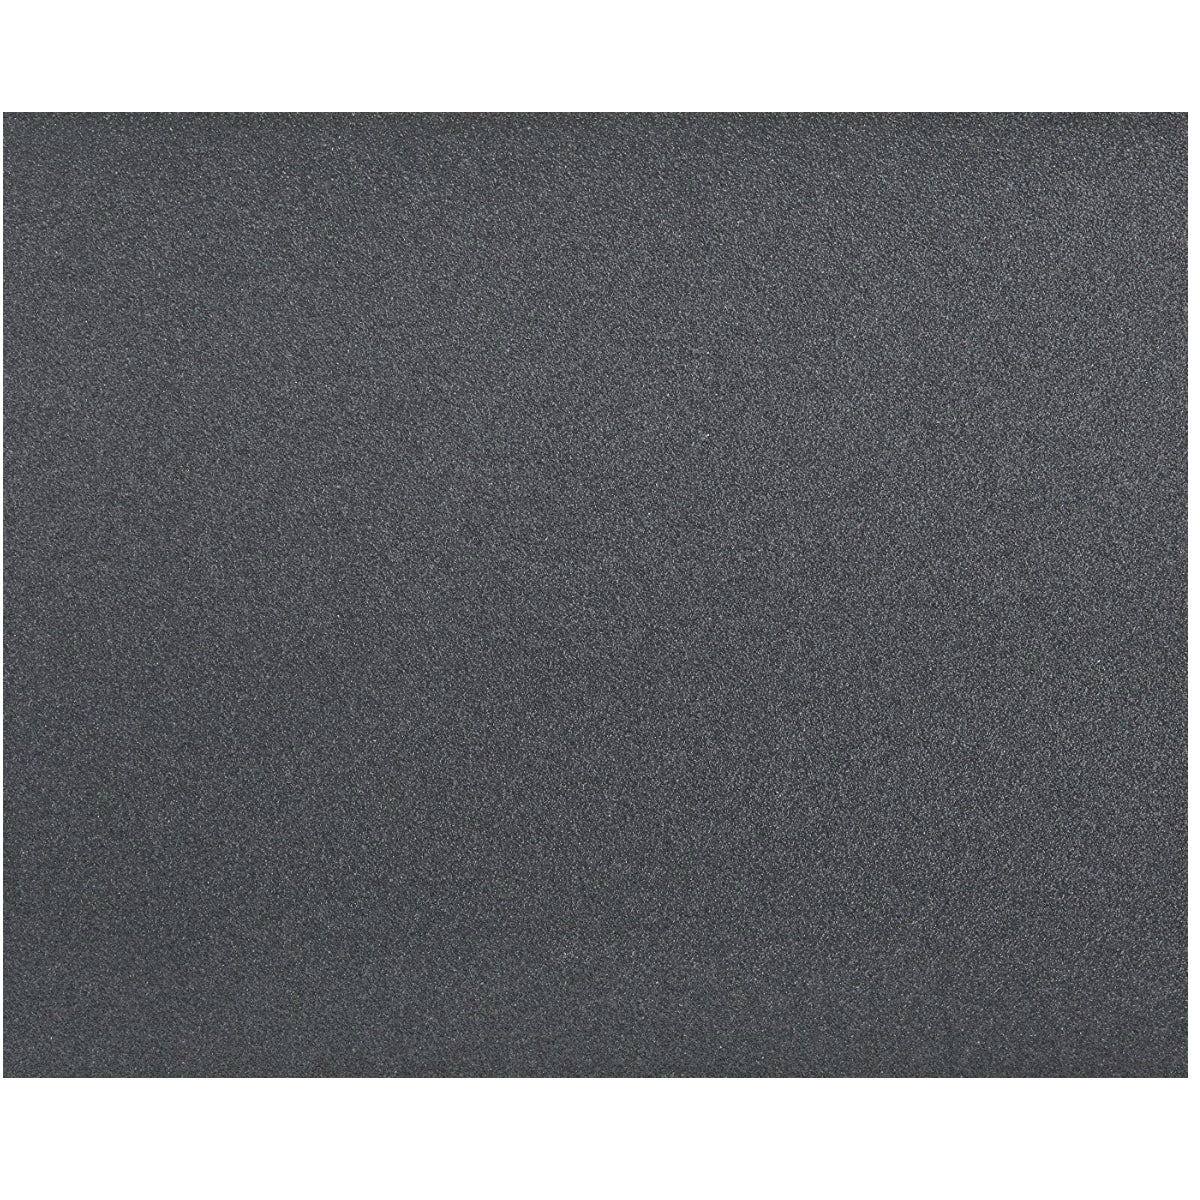 3M 02018 Tri-M-Ite - Wet Or Dry Sandpaper Sheets, 9" x 11", 80/C, 50-Pack